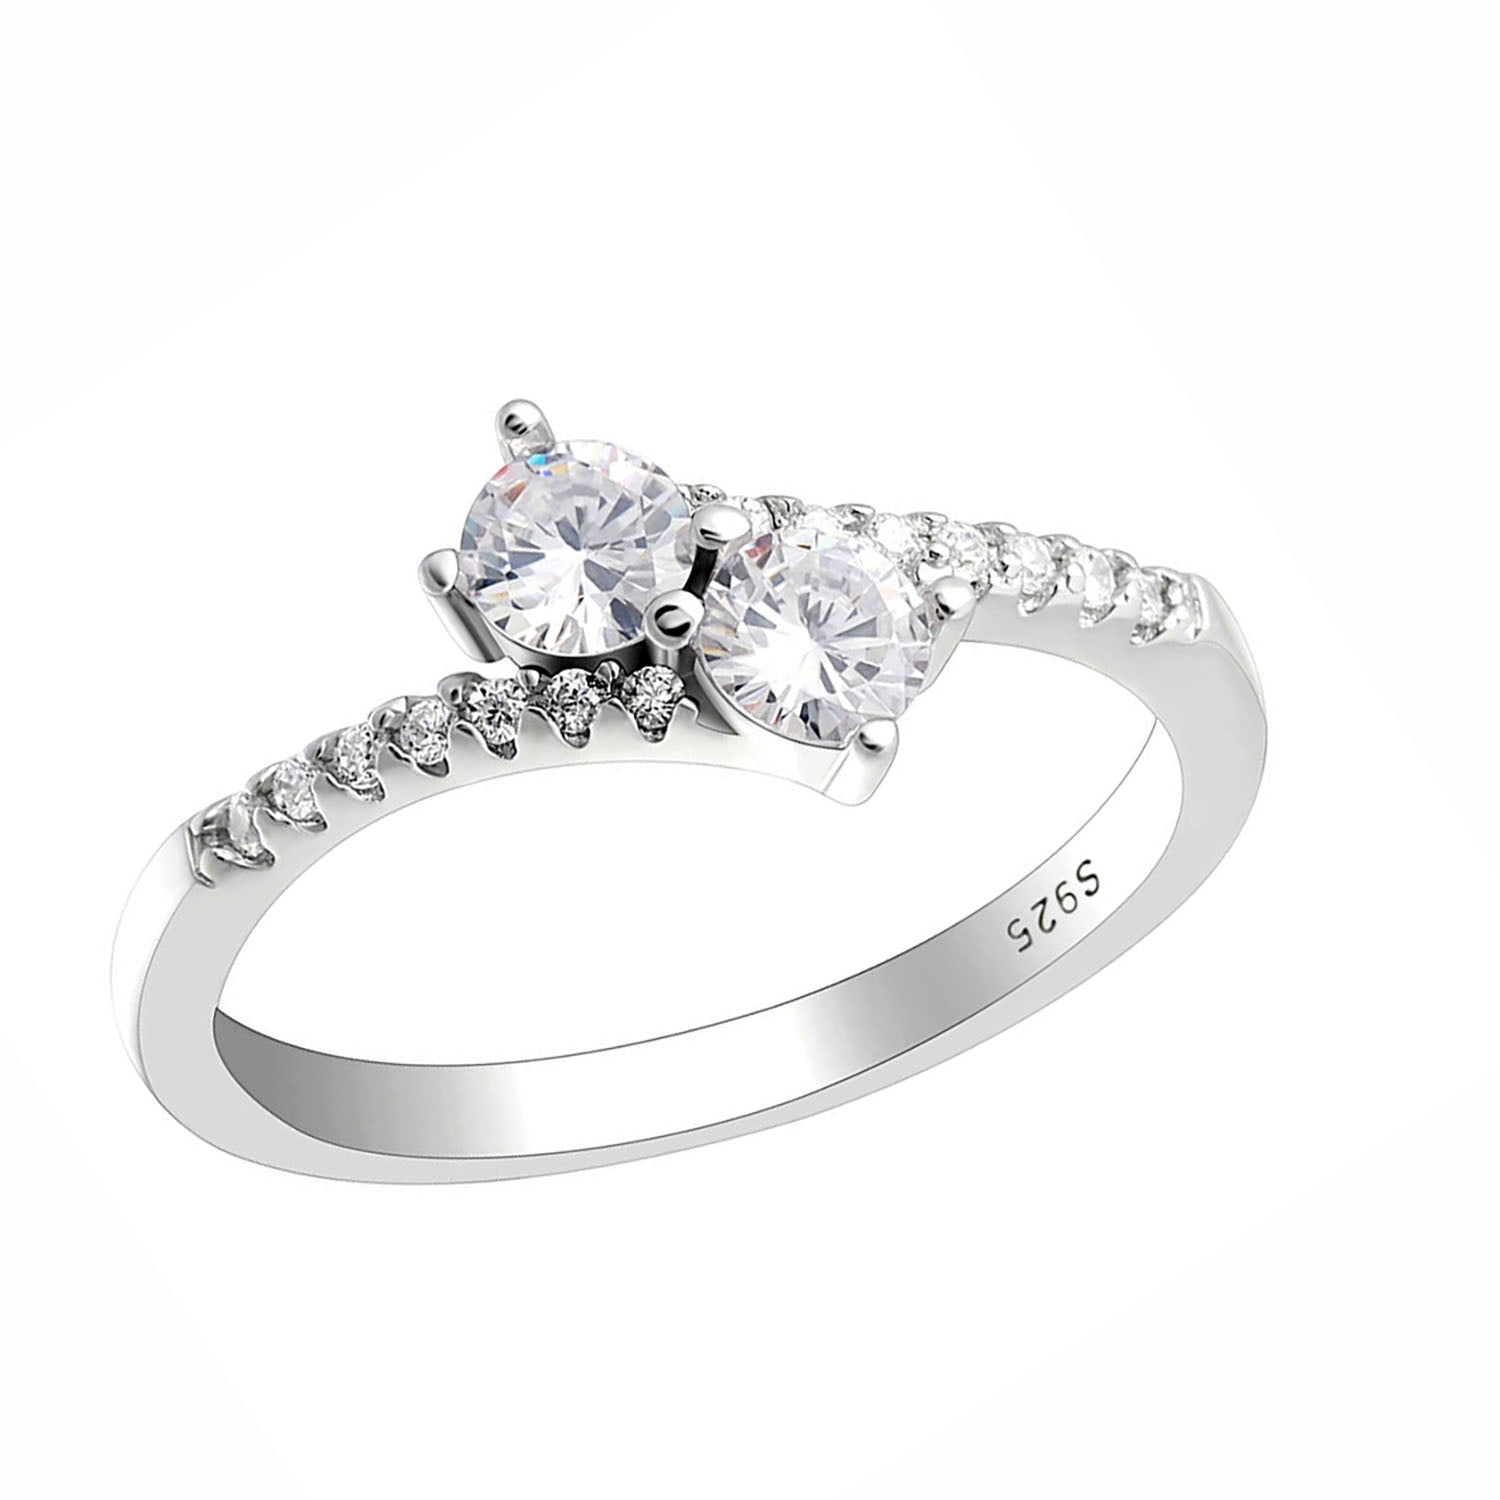 Tatiana Engagement Ring Sterling Silver 2 Stone Cz Womens Ginger Lyne Collection - 6